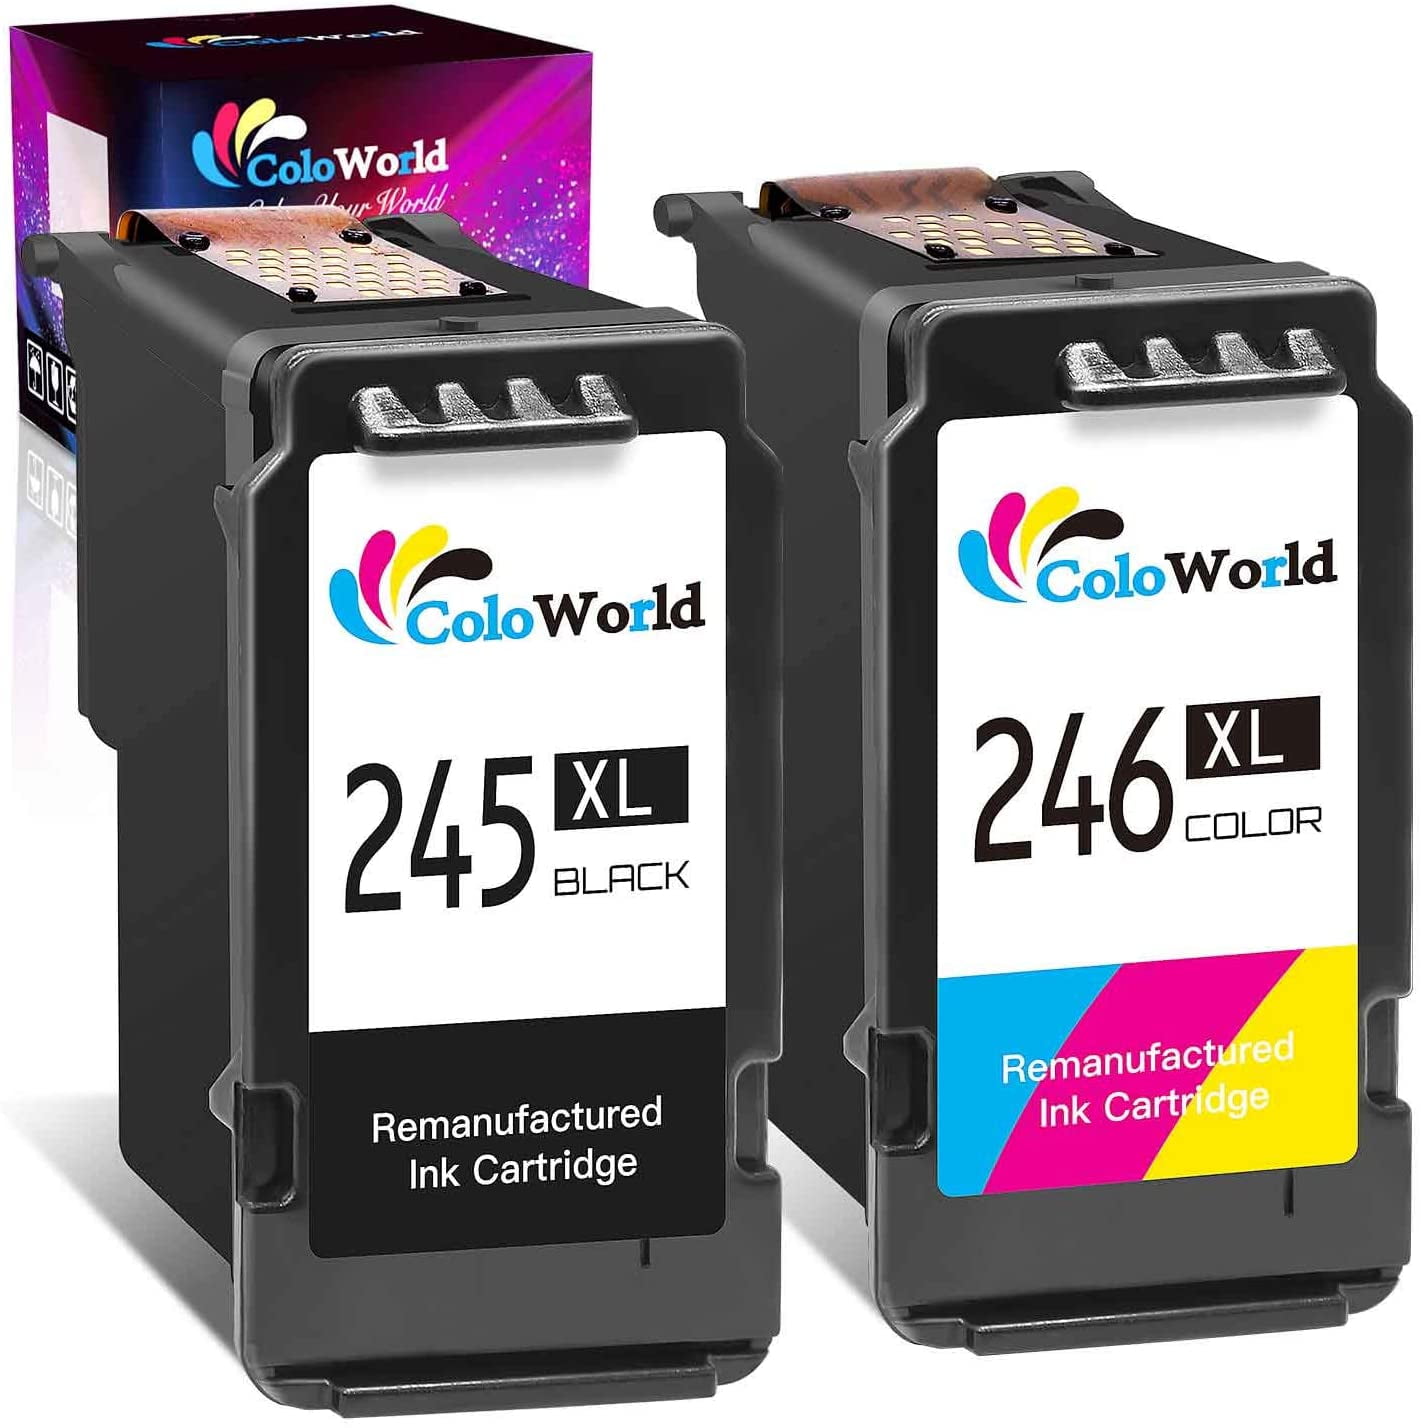 CKMY Remanufactured 245 246 Ink Cartridge Replacement for Canon PG245 CL246 243 244 Combo Pack for Pixma MG3022 MG2522 TR4520 TR4522 MG2922 MG2920 TS202 MX492 MX490 iP2820 TS302 MG2520 MG2525 Printer 